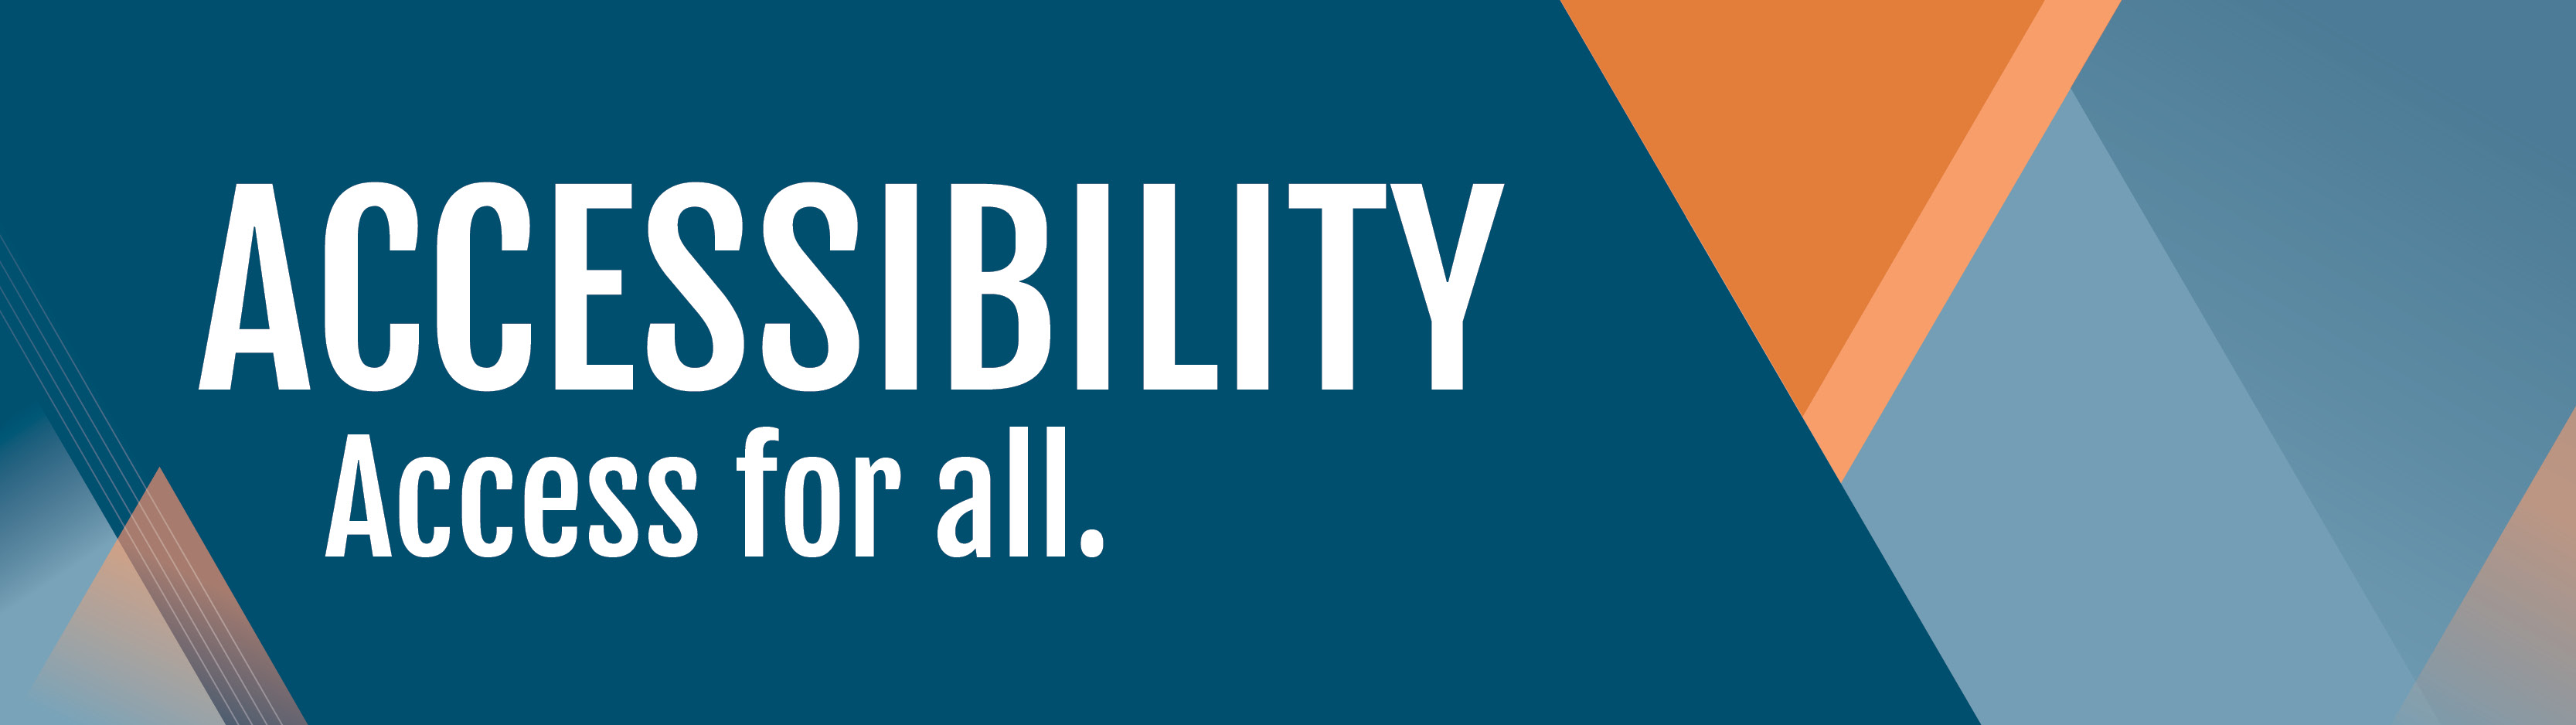 Accessibility - Access for all. page banner